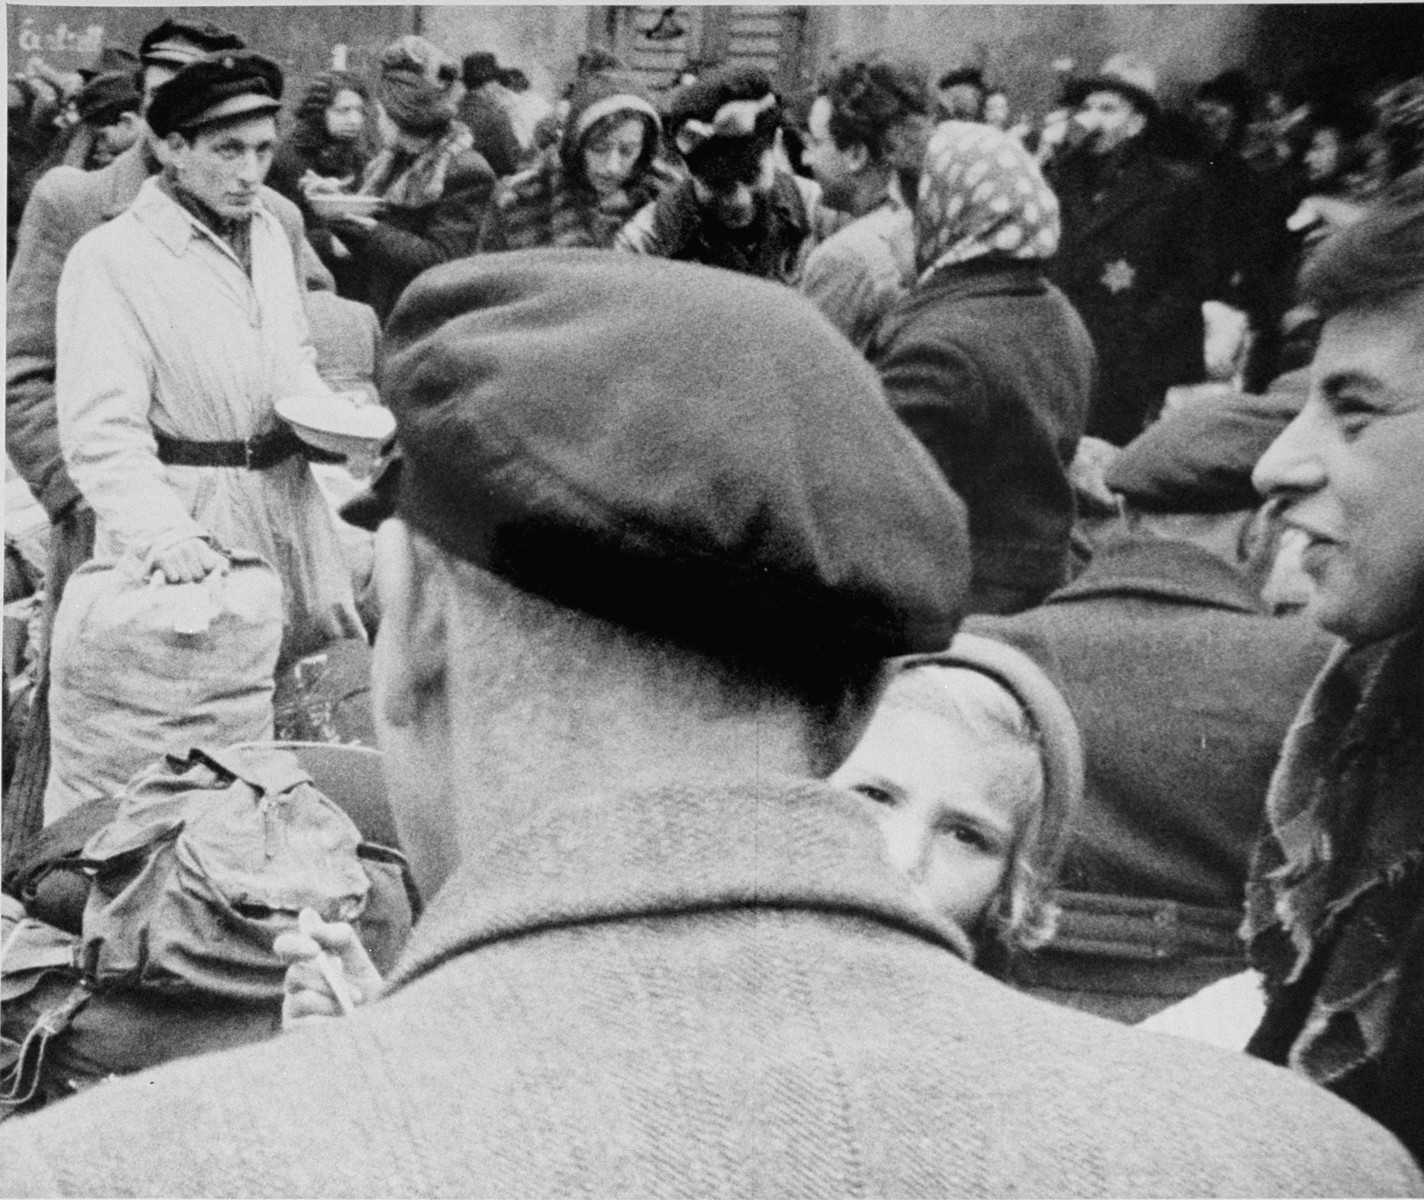 Members of a transport of Dutch Jews that has just arrived in Theresienstadt are gathered in the courtyard of the ghetto. [oversized photo]